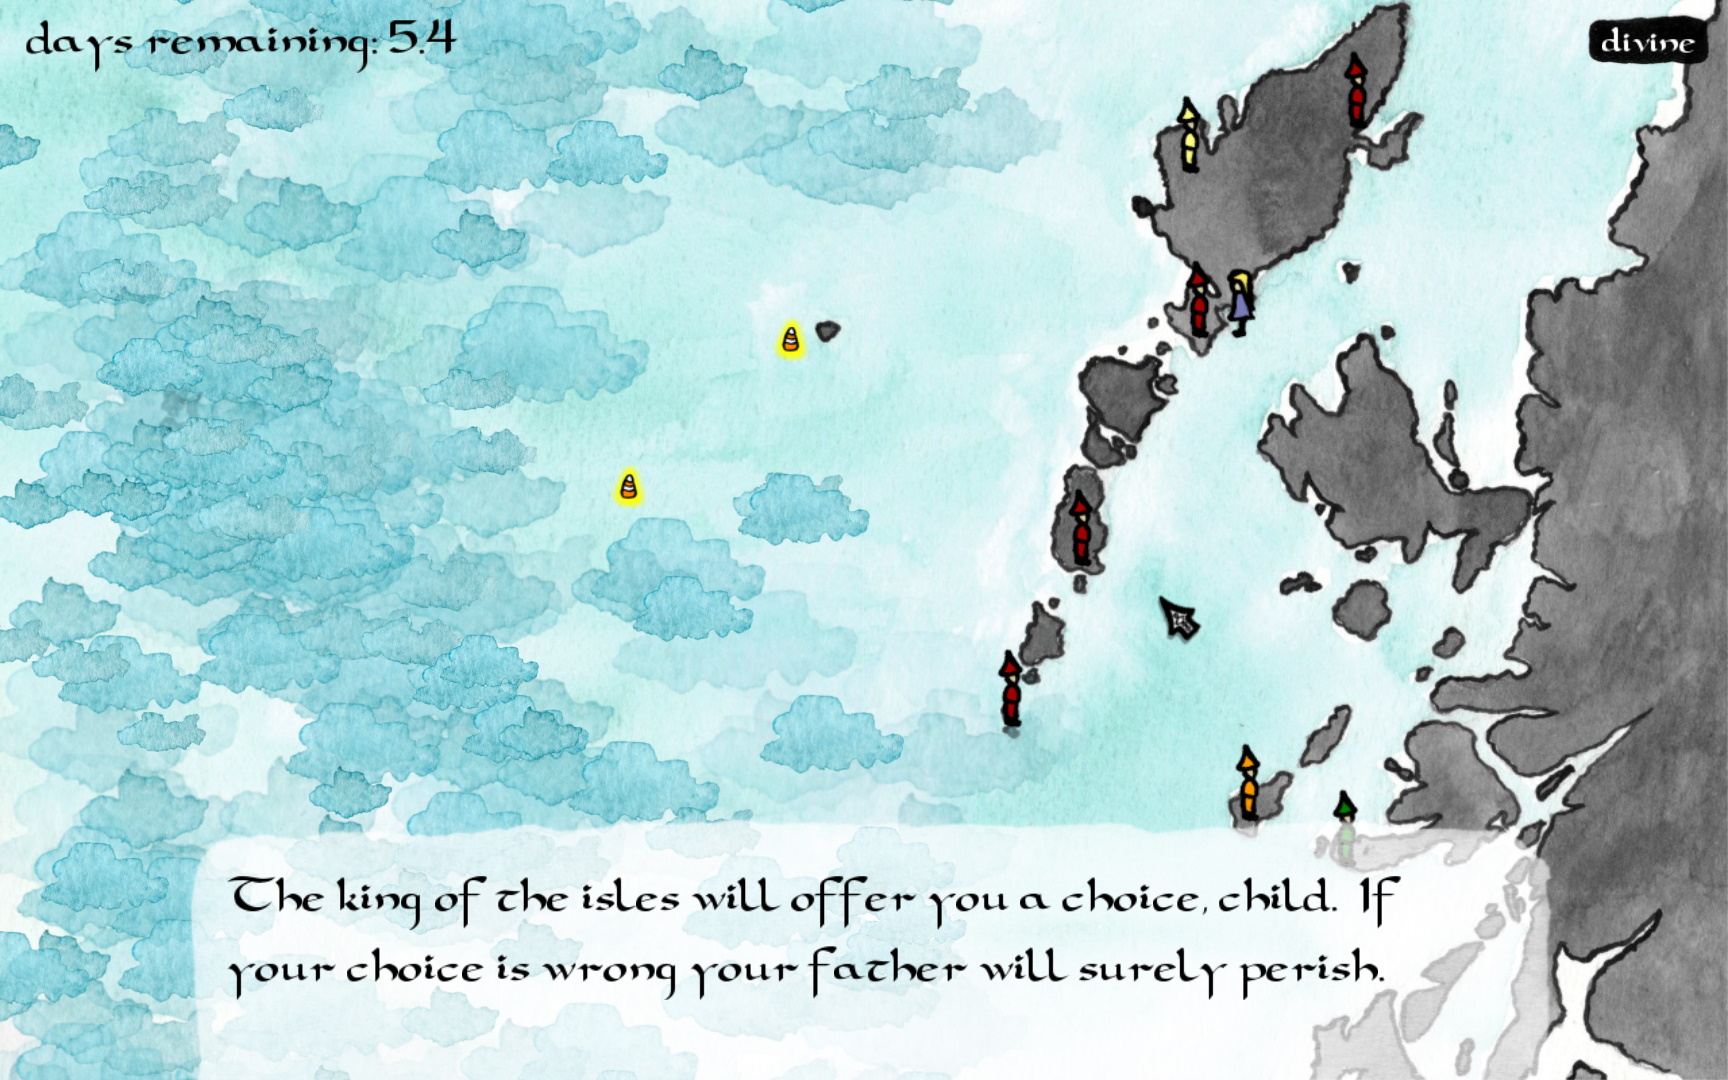 Screenshot of the game. A watercolour map of the Western Isles, with a number of figures residing on different islands. To the West are 2 highlighted buoys and a lot of watercolour clouds obscuring the ocean. At the bottom of the screen is some text, saying 'The king of the isles will offer you a choice, child. If your choice is wrong your father will surely perish.''